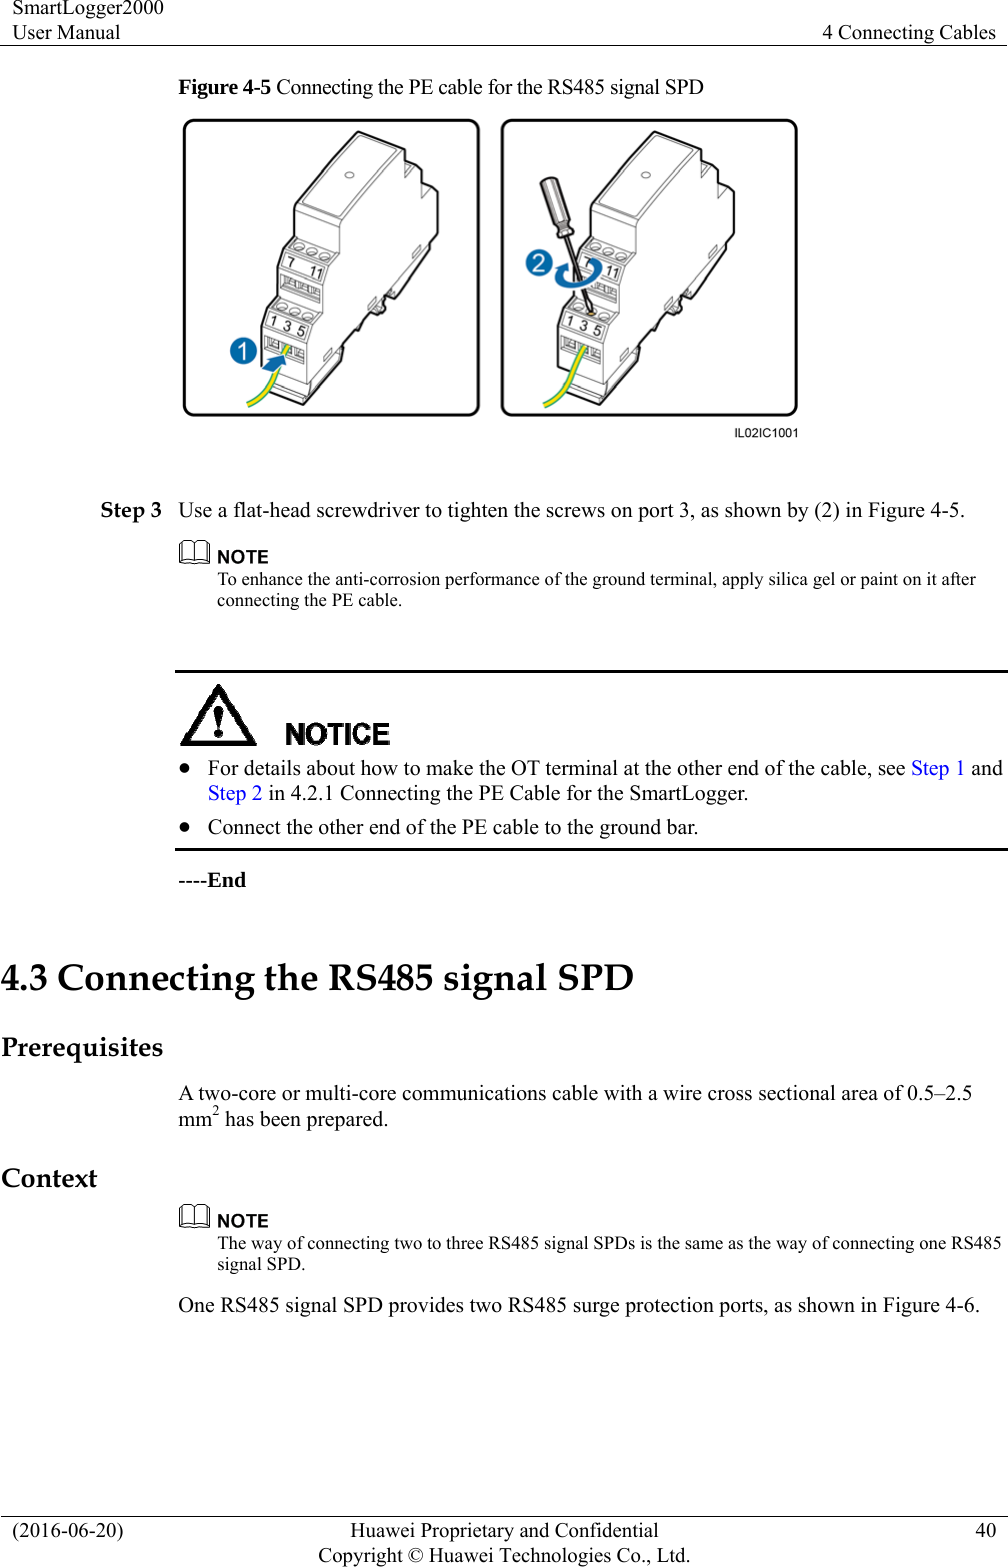 SmartLogger2000 User Manual  4 Connecting Cables (2016-06-20)  Huawei Proprietary and Confidential         Copyright © Huawei Technologies Co., Ltd.40 Figure 4-5 Connecting the PE cable for the RS485 signal SPD   Step 3 Use a flat-head screwdriver to tighten the screws on port 3, as shown by (2) in Figure 4-5.  To enhance the anti-corrosion performance of the ground terminal, apply silica gel or paint on it after connecting the PE cable.    For details about how to make the OT terminal at the other end of the cable, see Step 1 and Step 2 in 4.2.1 Connecting the PE Cable for the SmartLogger.    Connect the other end of the PE cable to the ground bar. ----End 4.3 Connecting the RS485 signal SPD Prerequisites A two-core or multi-core communications cable with a wire cross sectional area of 0.5–2.5 mm2 has been prepared. Context  The way of connecting two to three RS485 signal SPDs is the same as the way of connecting one RS485 signal SPD. One RS485 signal SPD provides two RS485 surge protection ports, as shown in Figure 4-6.   